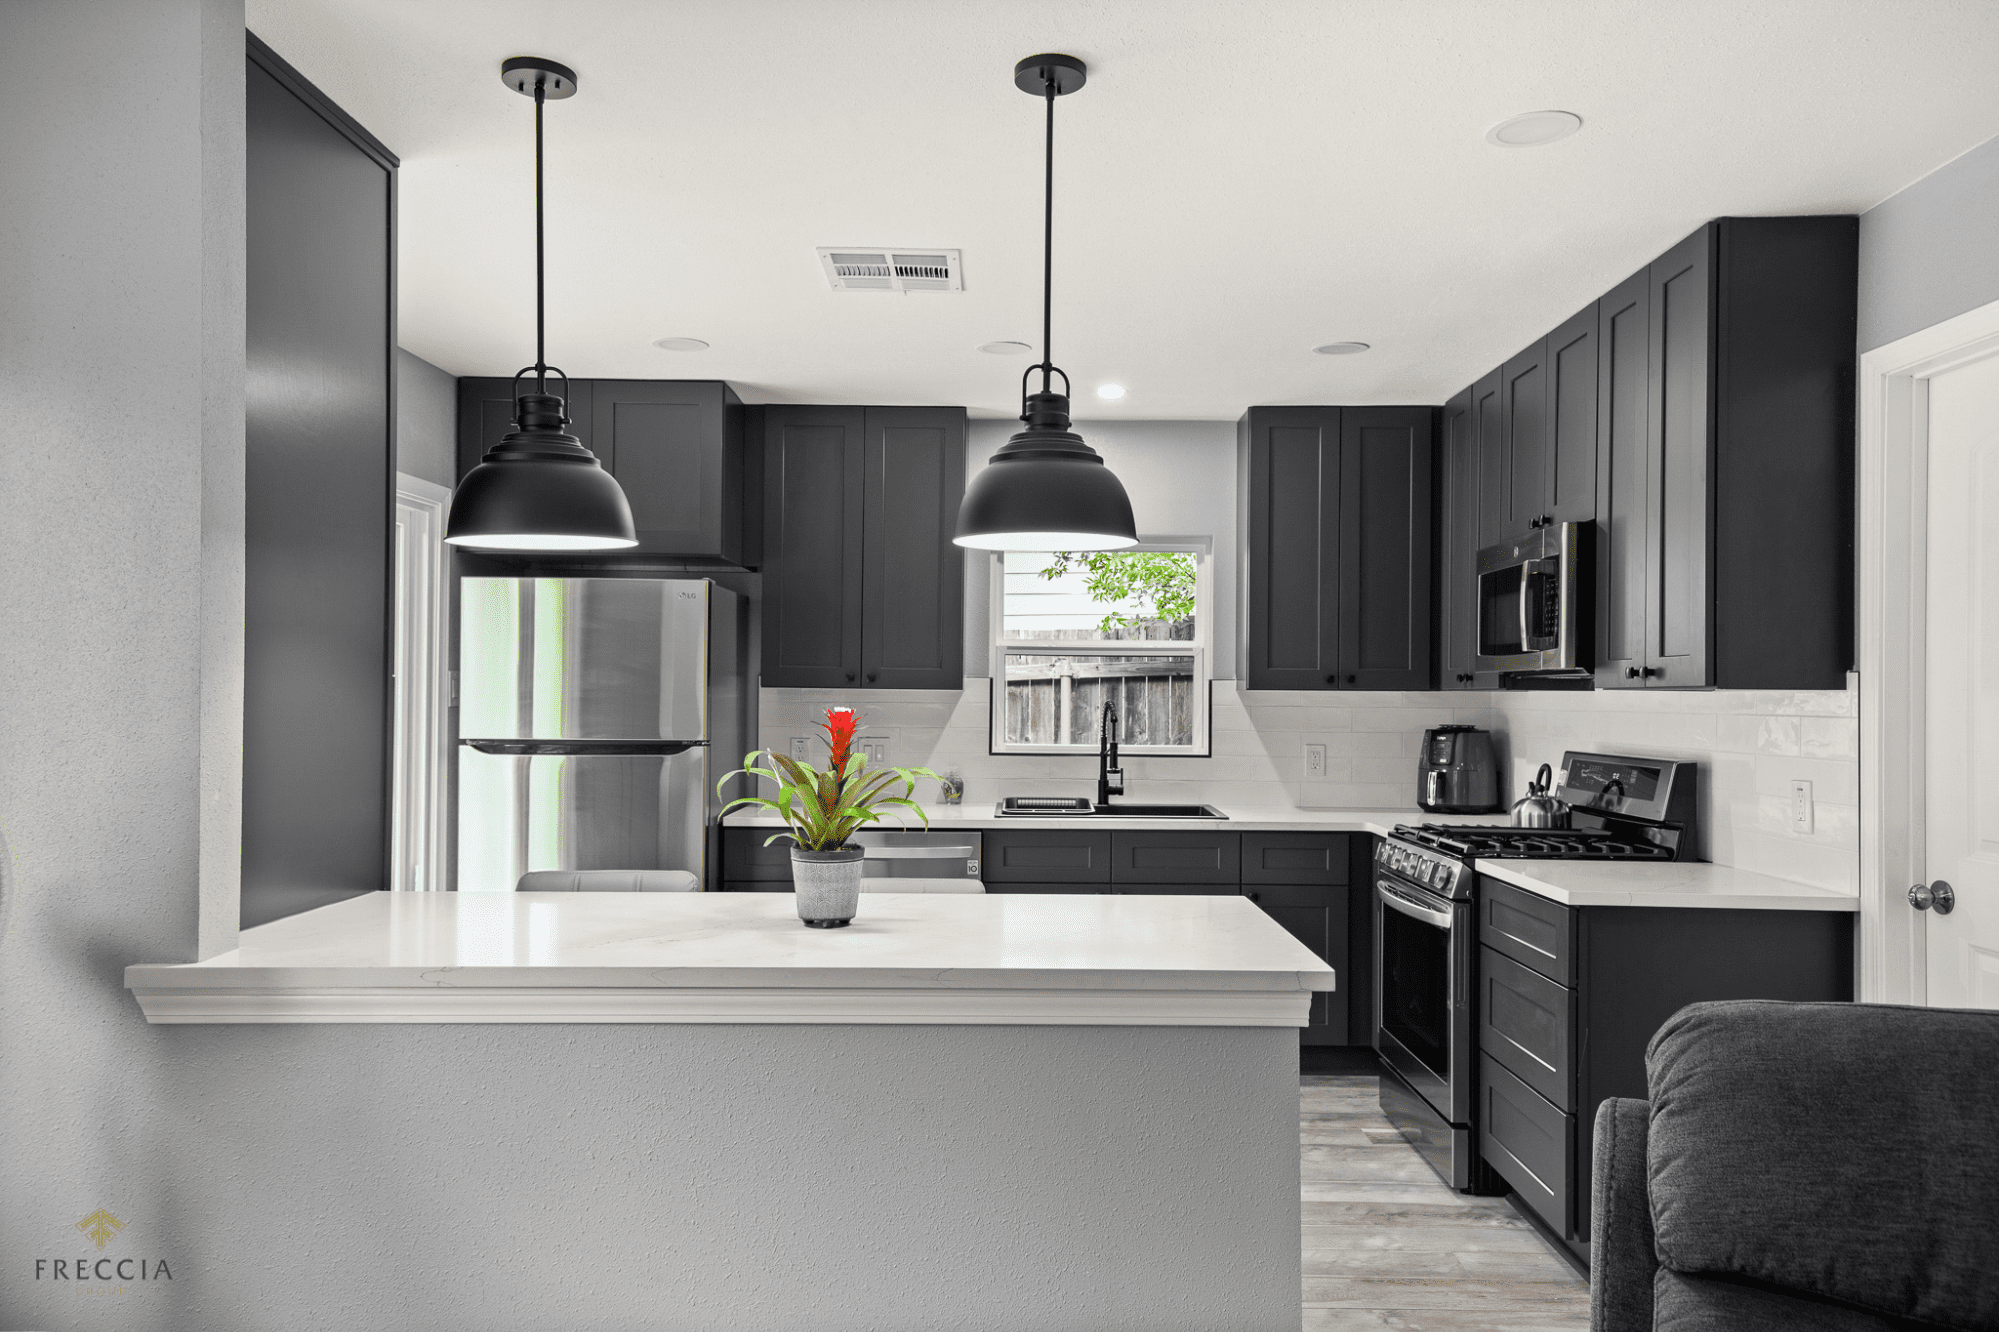 Newly renovated kitchen in Austin, TX! Beautiful quartz countertops, light fixtures, and more!